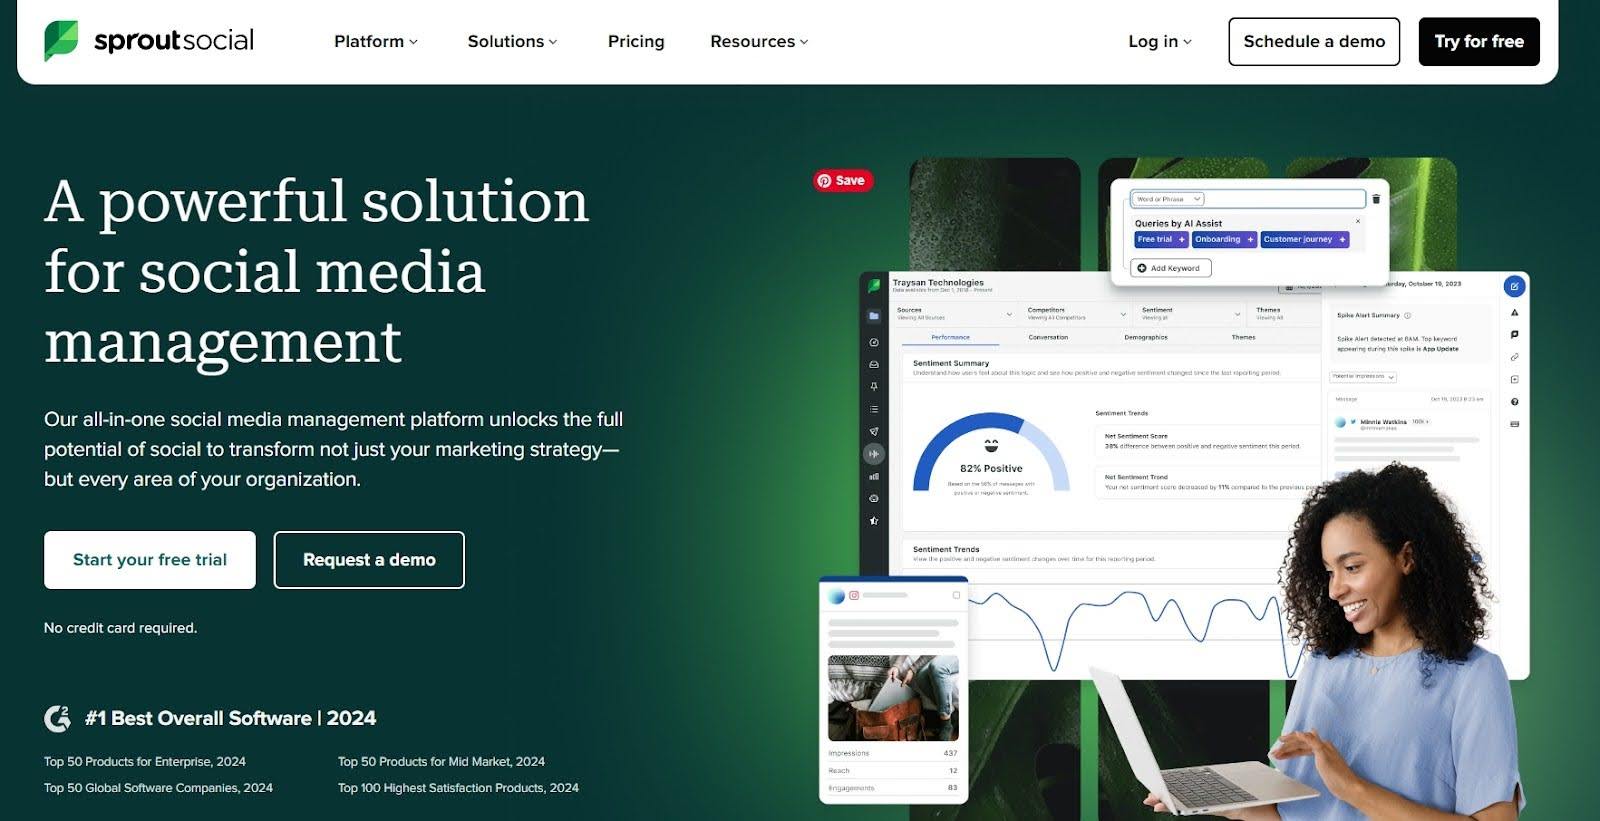 Sprout social Pinterest analytics tool